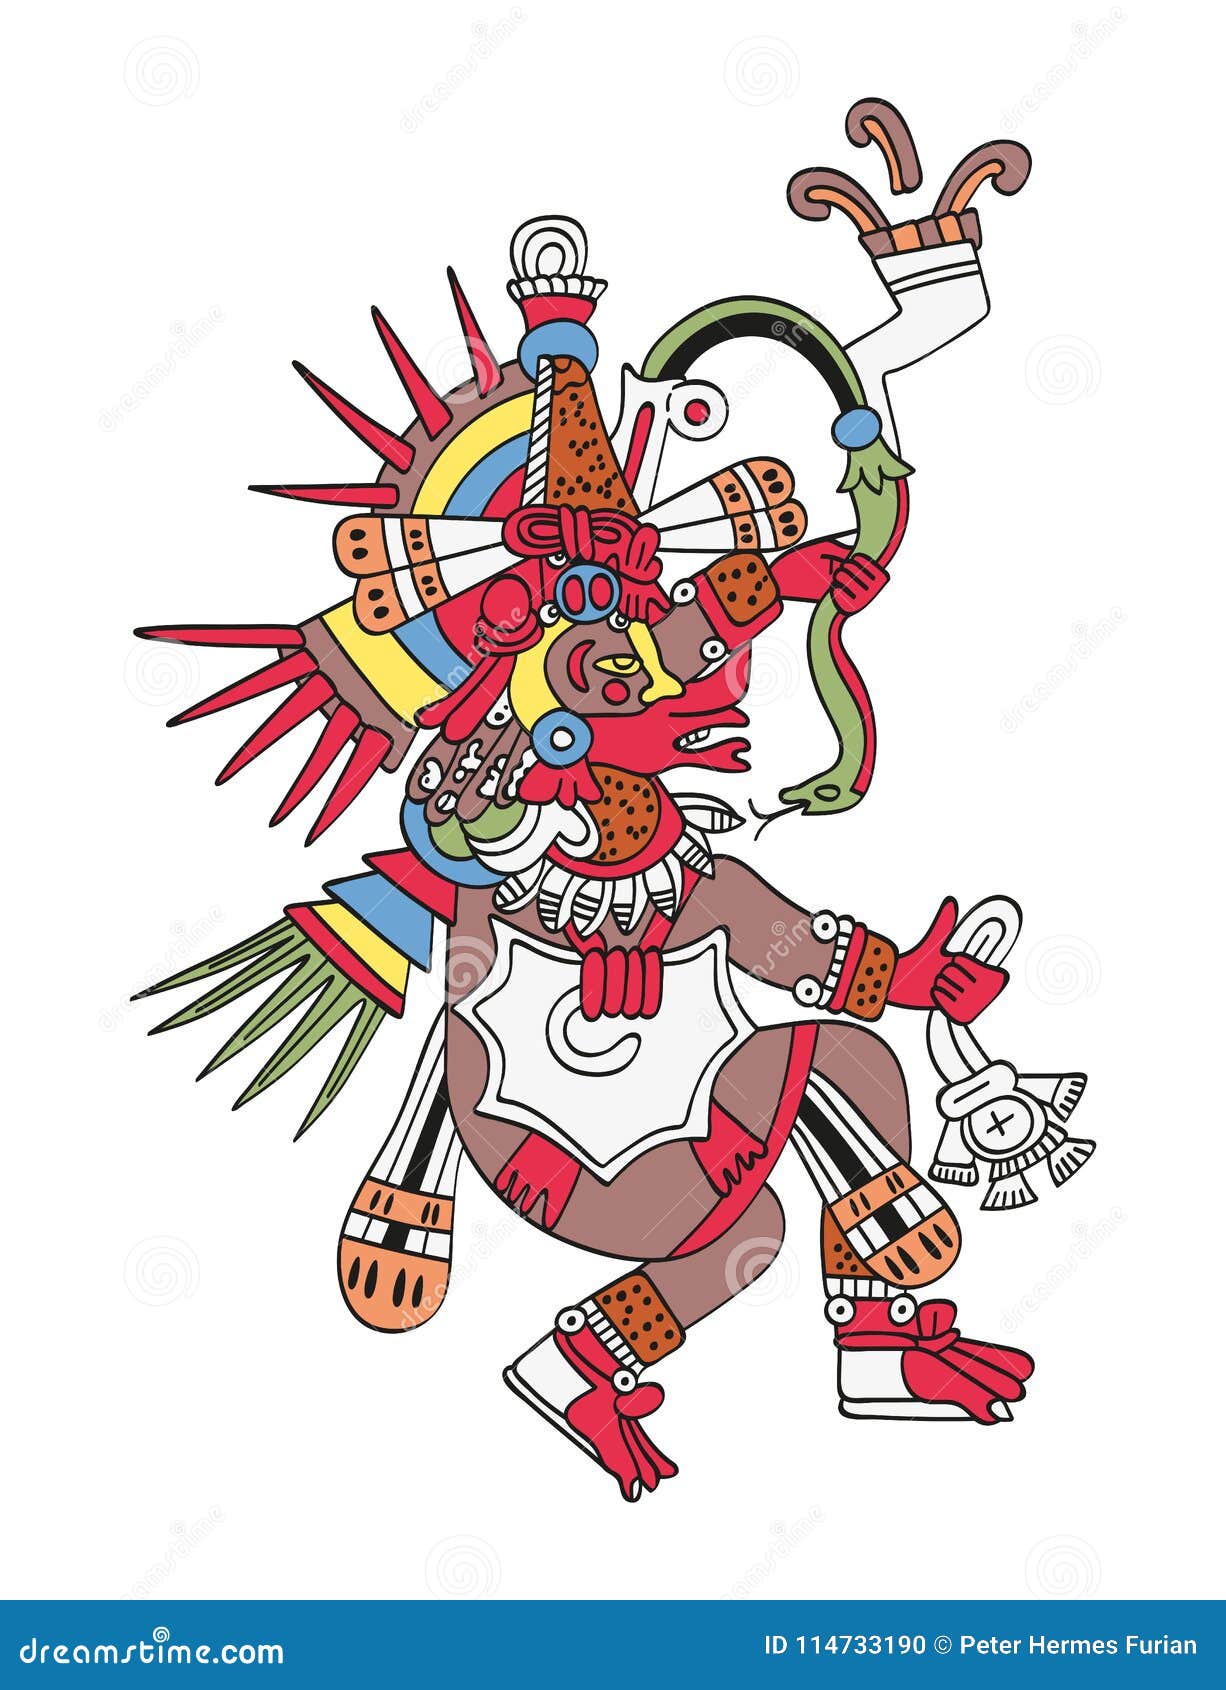 god quetzalcoatl, the feathered serpent